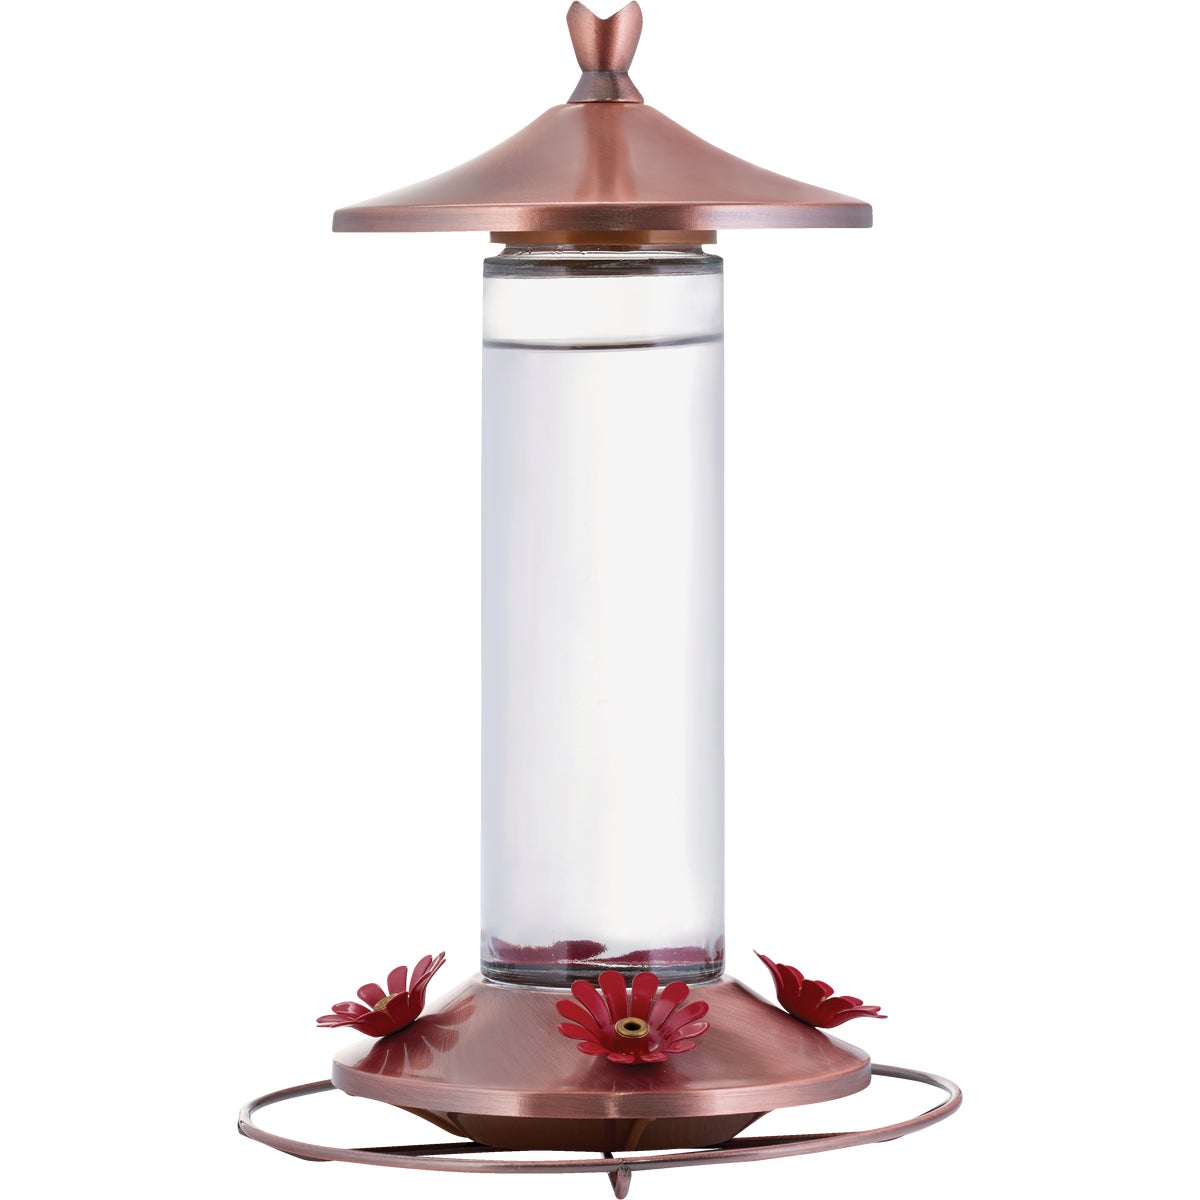 Item 700795, Features a brushed copper top and base with 4 feeding stations.